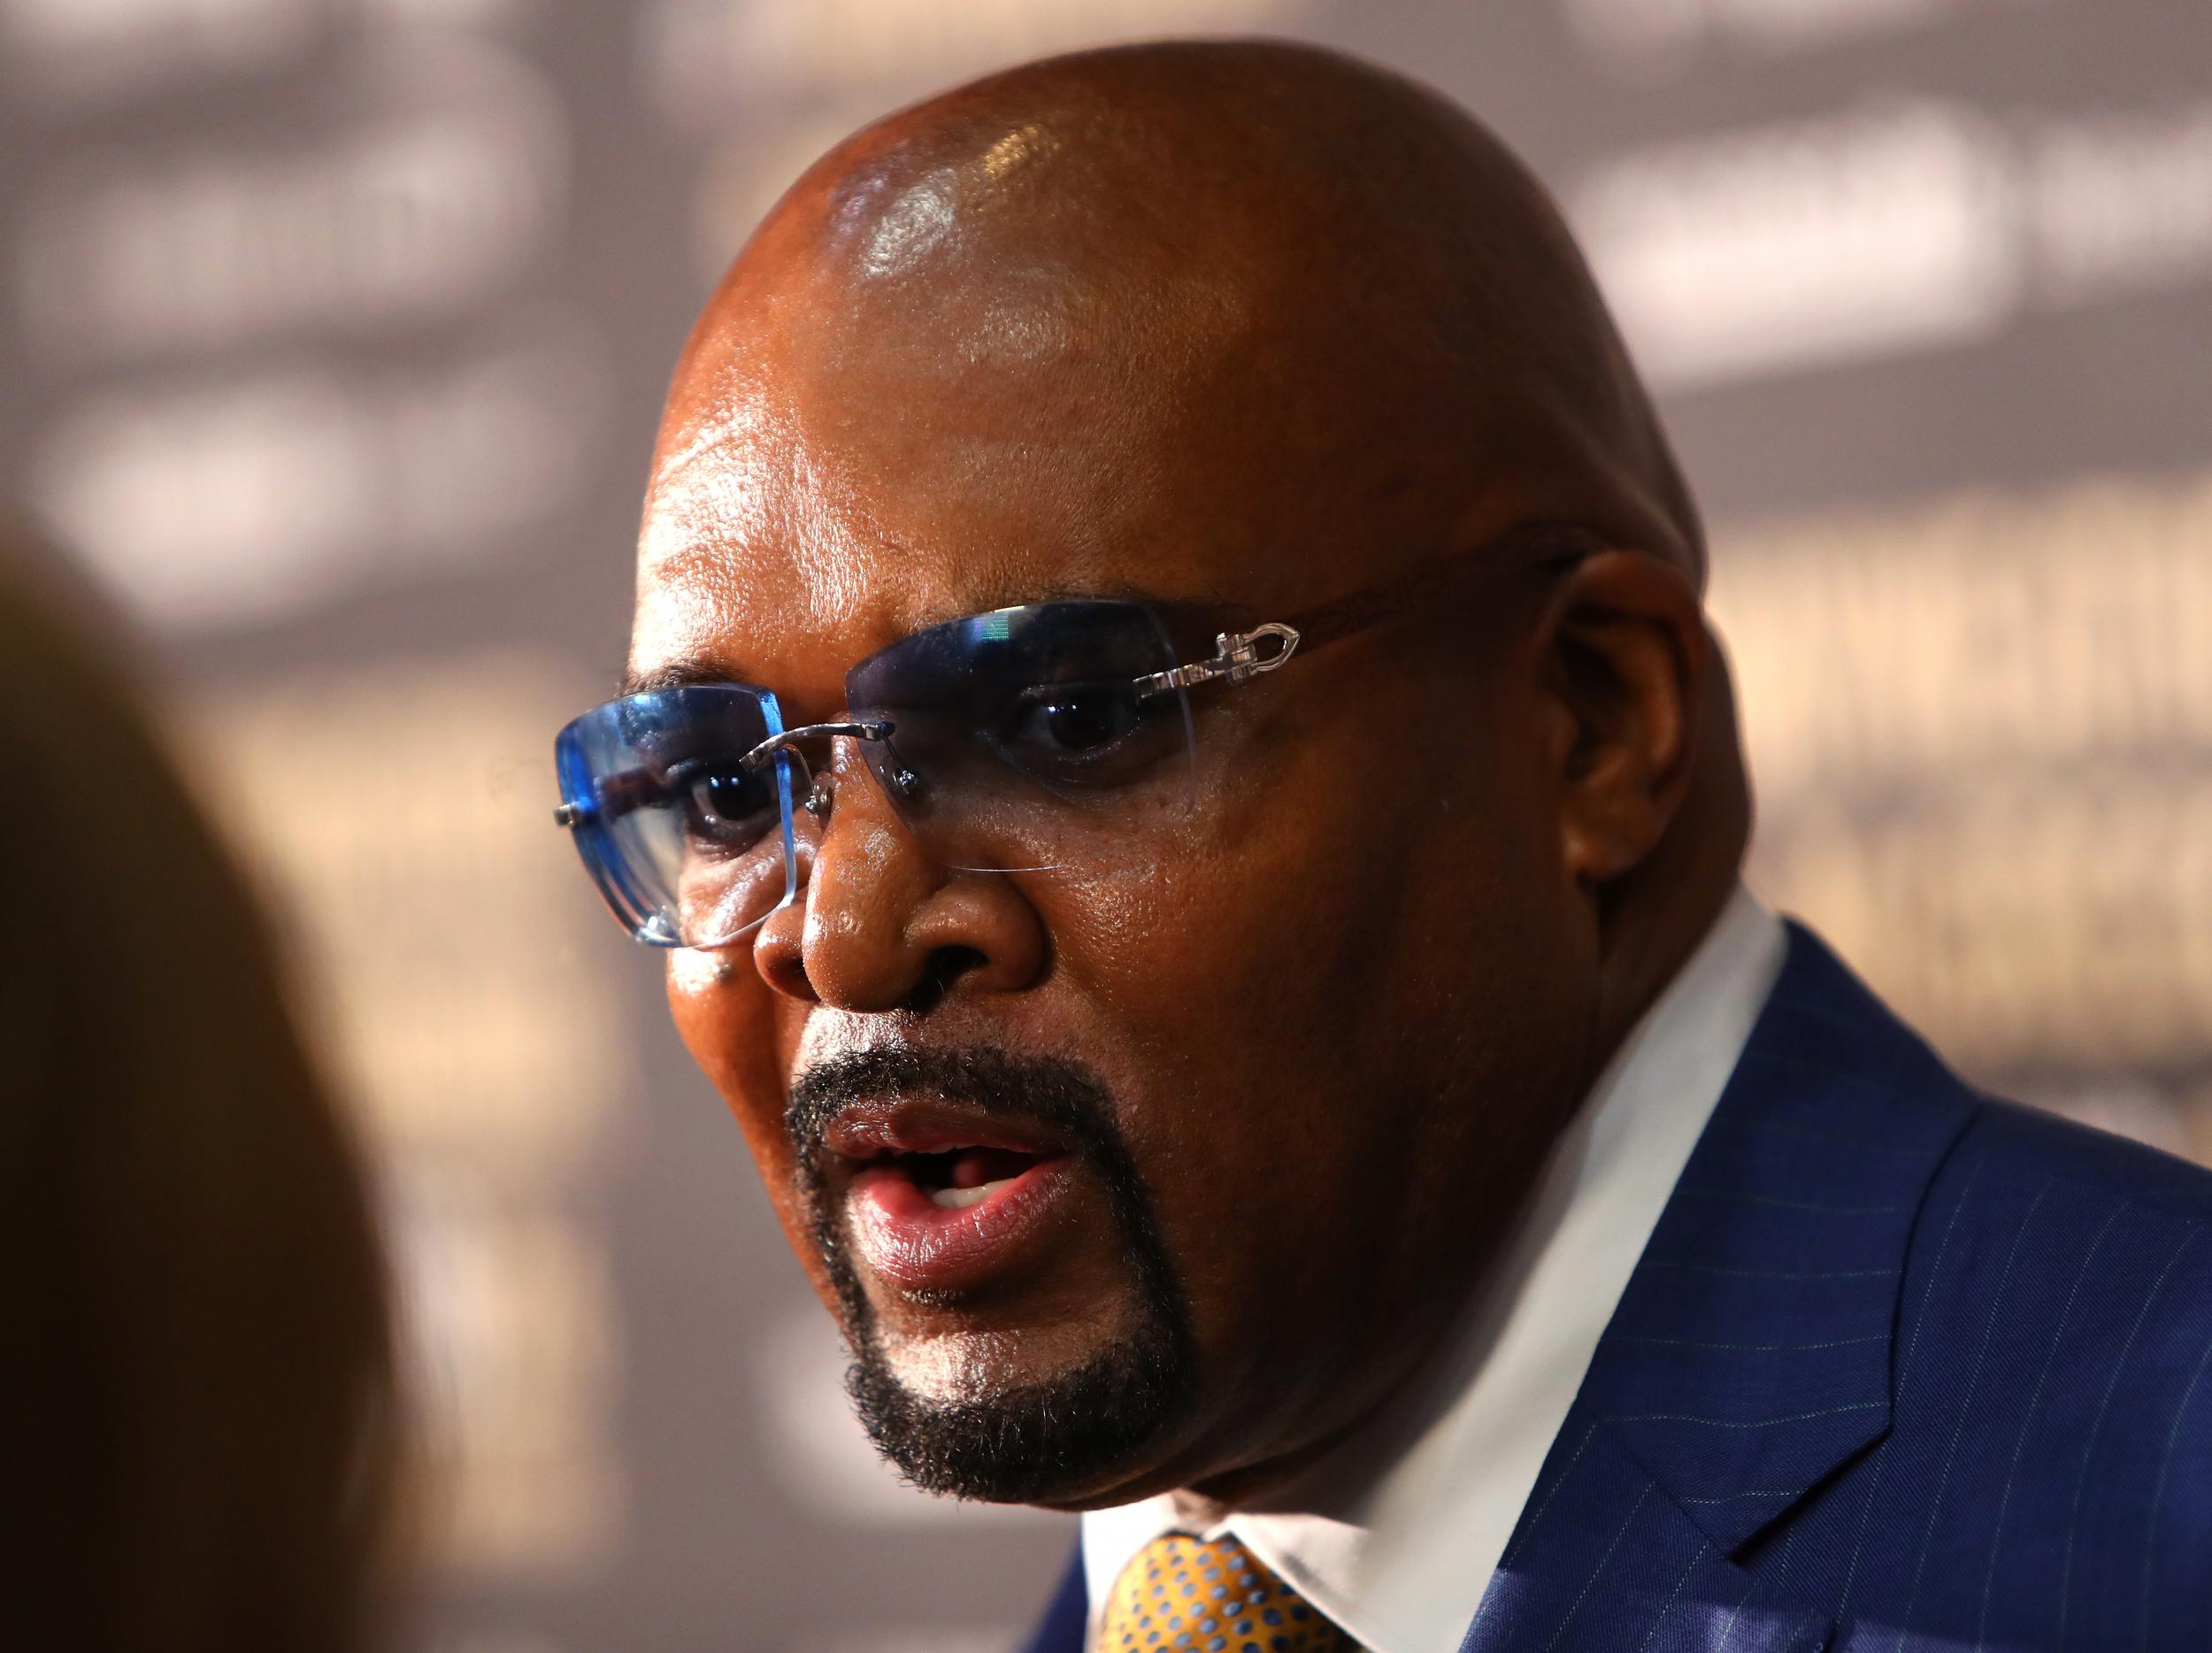 Ellerbe has defended ticket sales for the Las Vegas fight